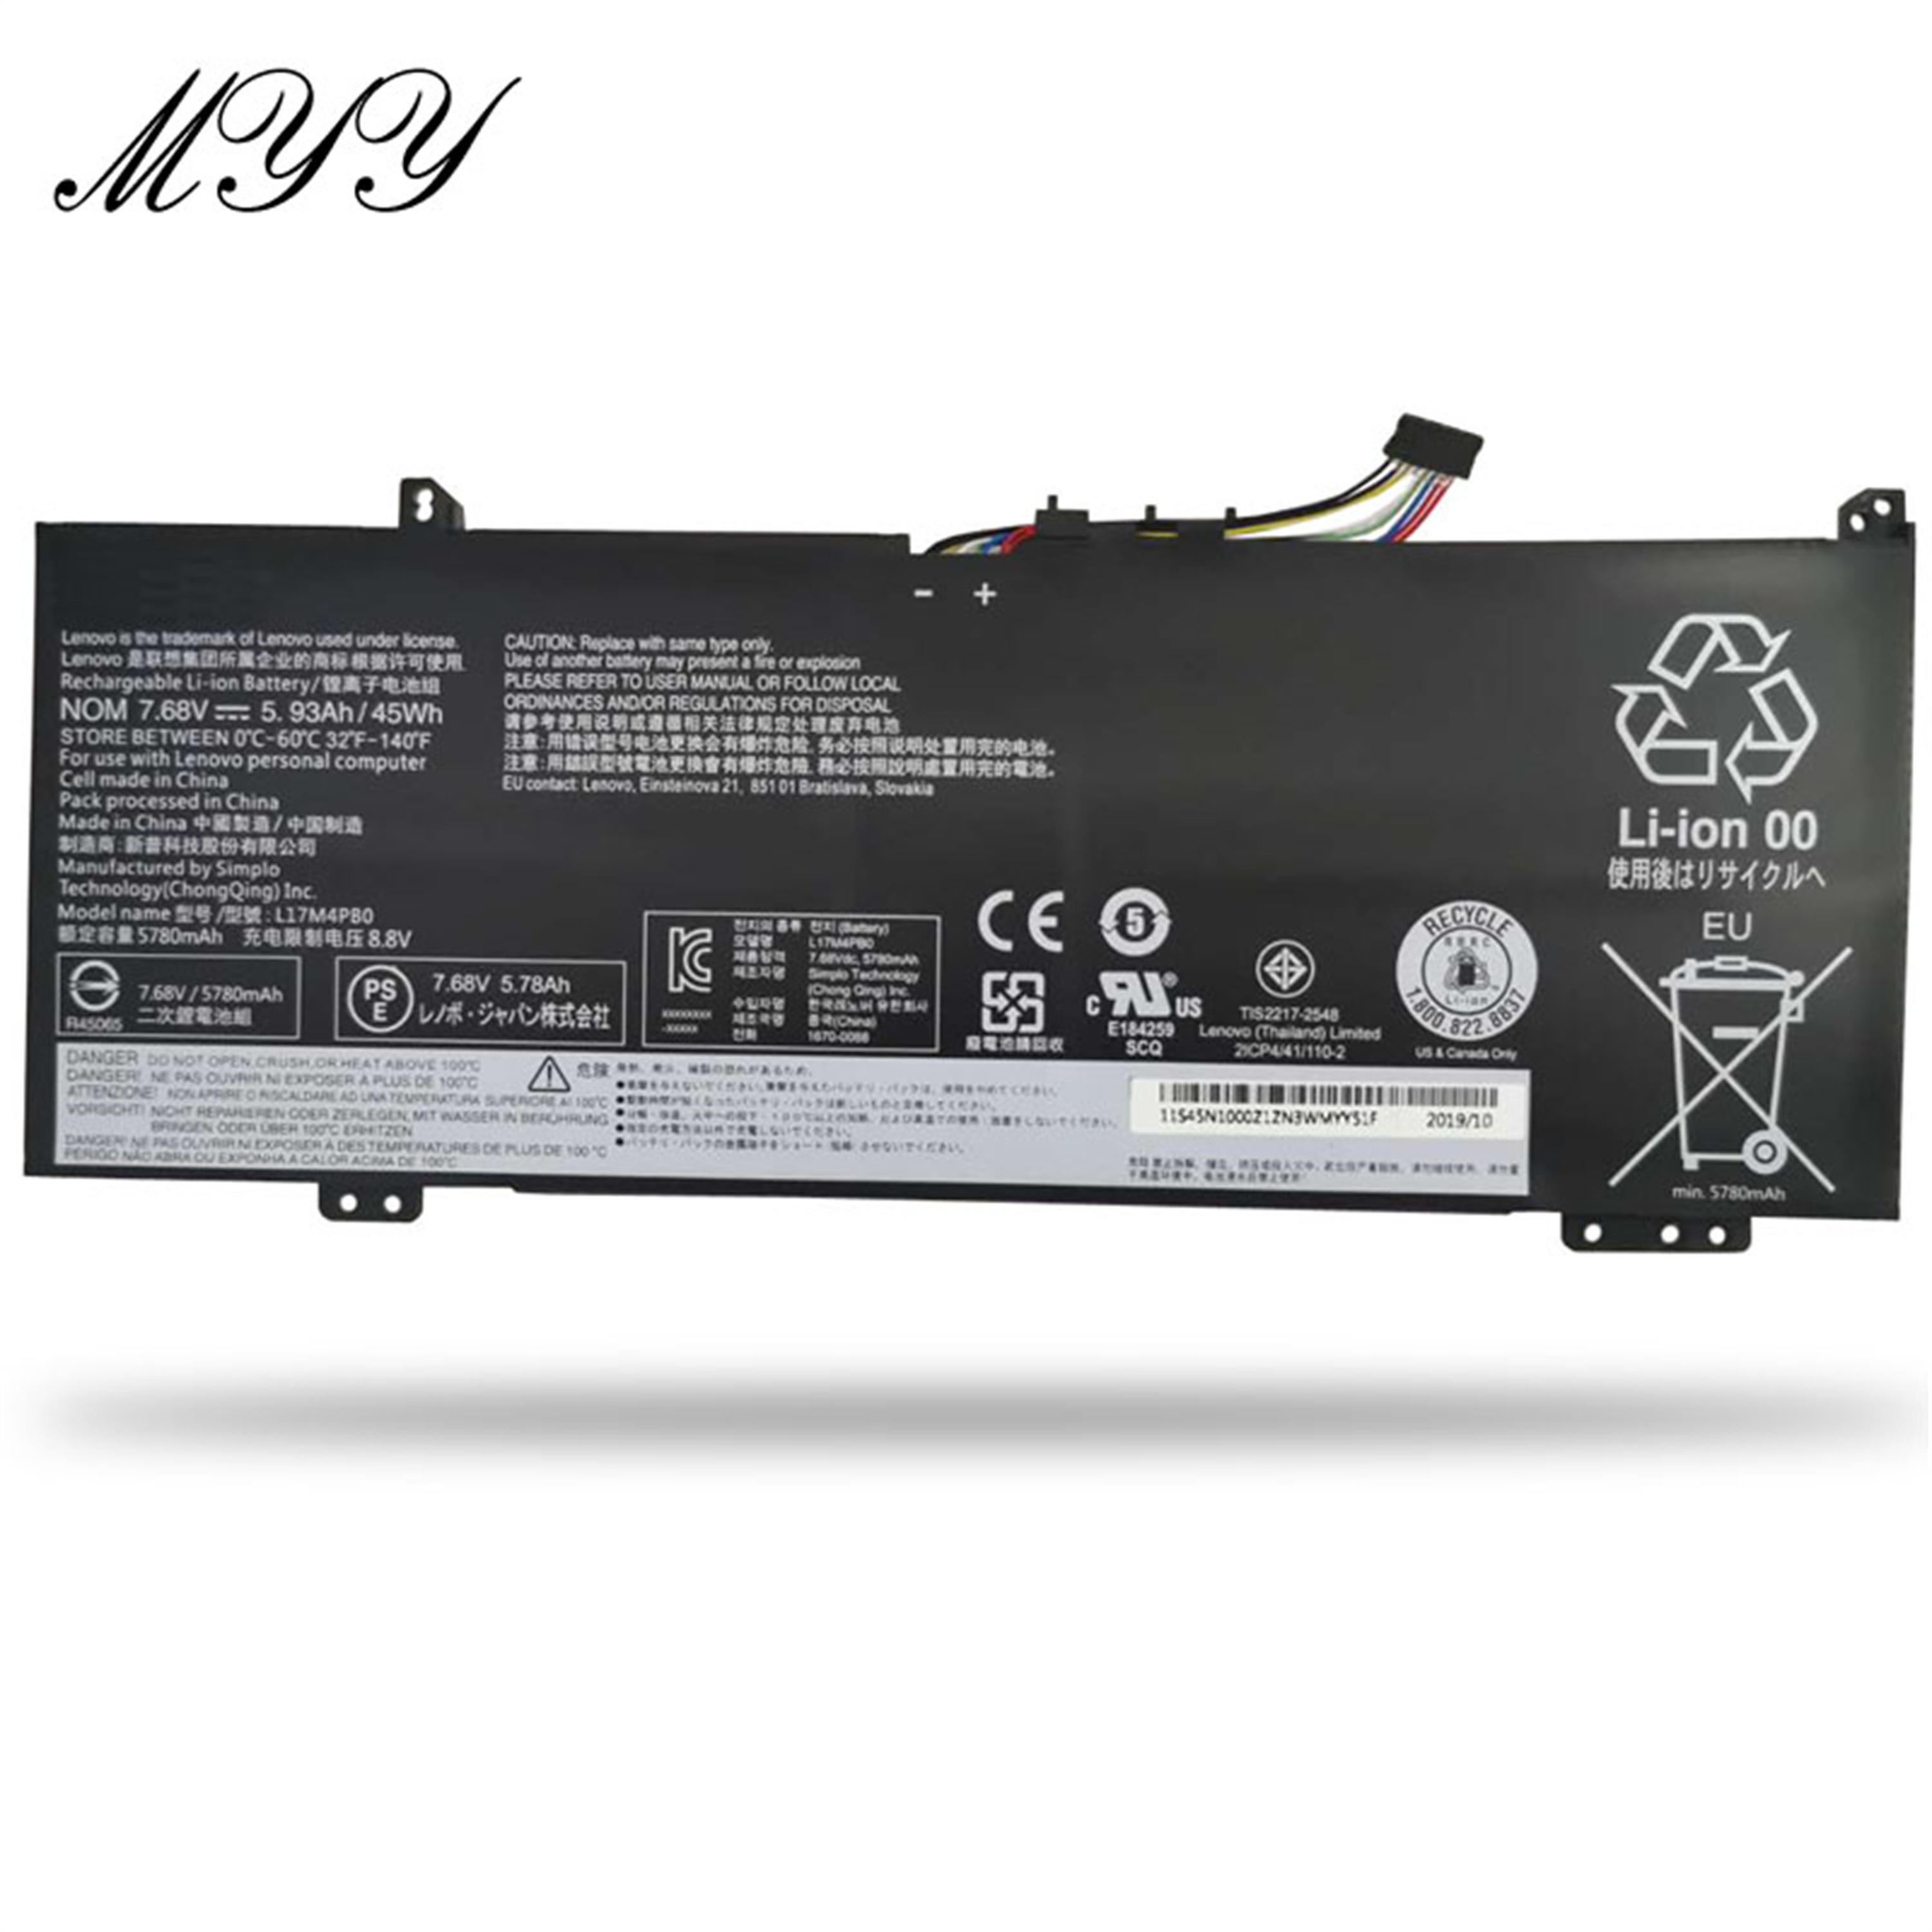 L17M4PB0 rechargeable lithium ion Notebook battery Laptop battery For Lenovo Lenovo Flex 6-14IKB Series IdeaPad 530S-14ARR Series IdeaPad 530S-14IKB Series IdeaPad 530S-15IKB Series 